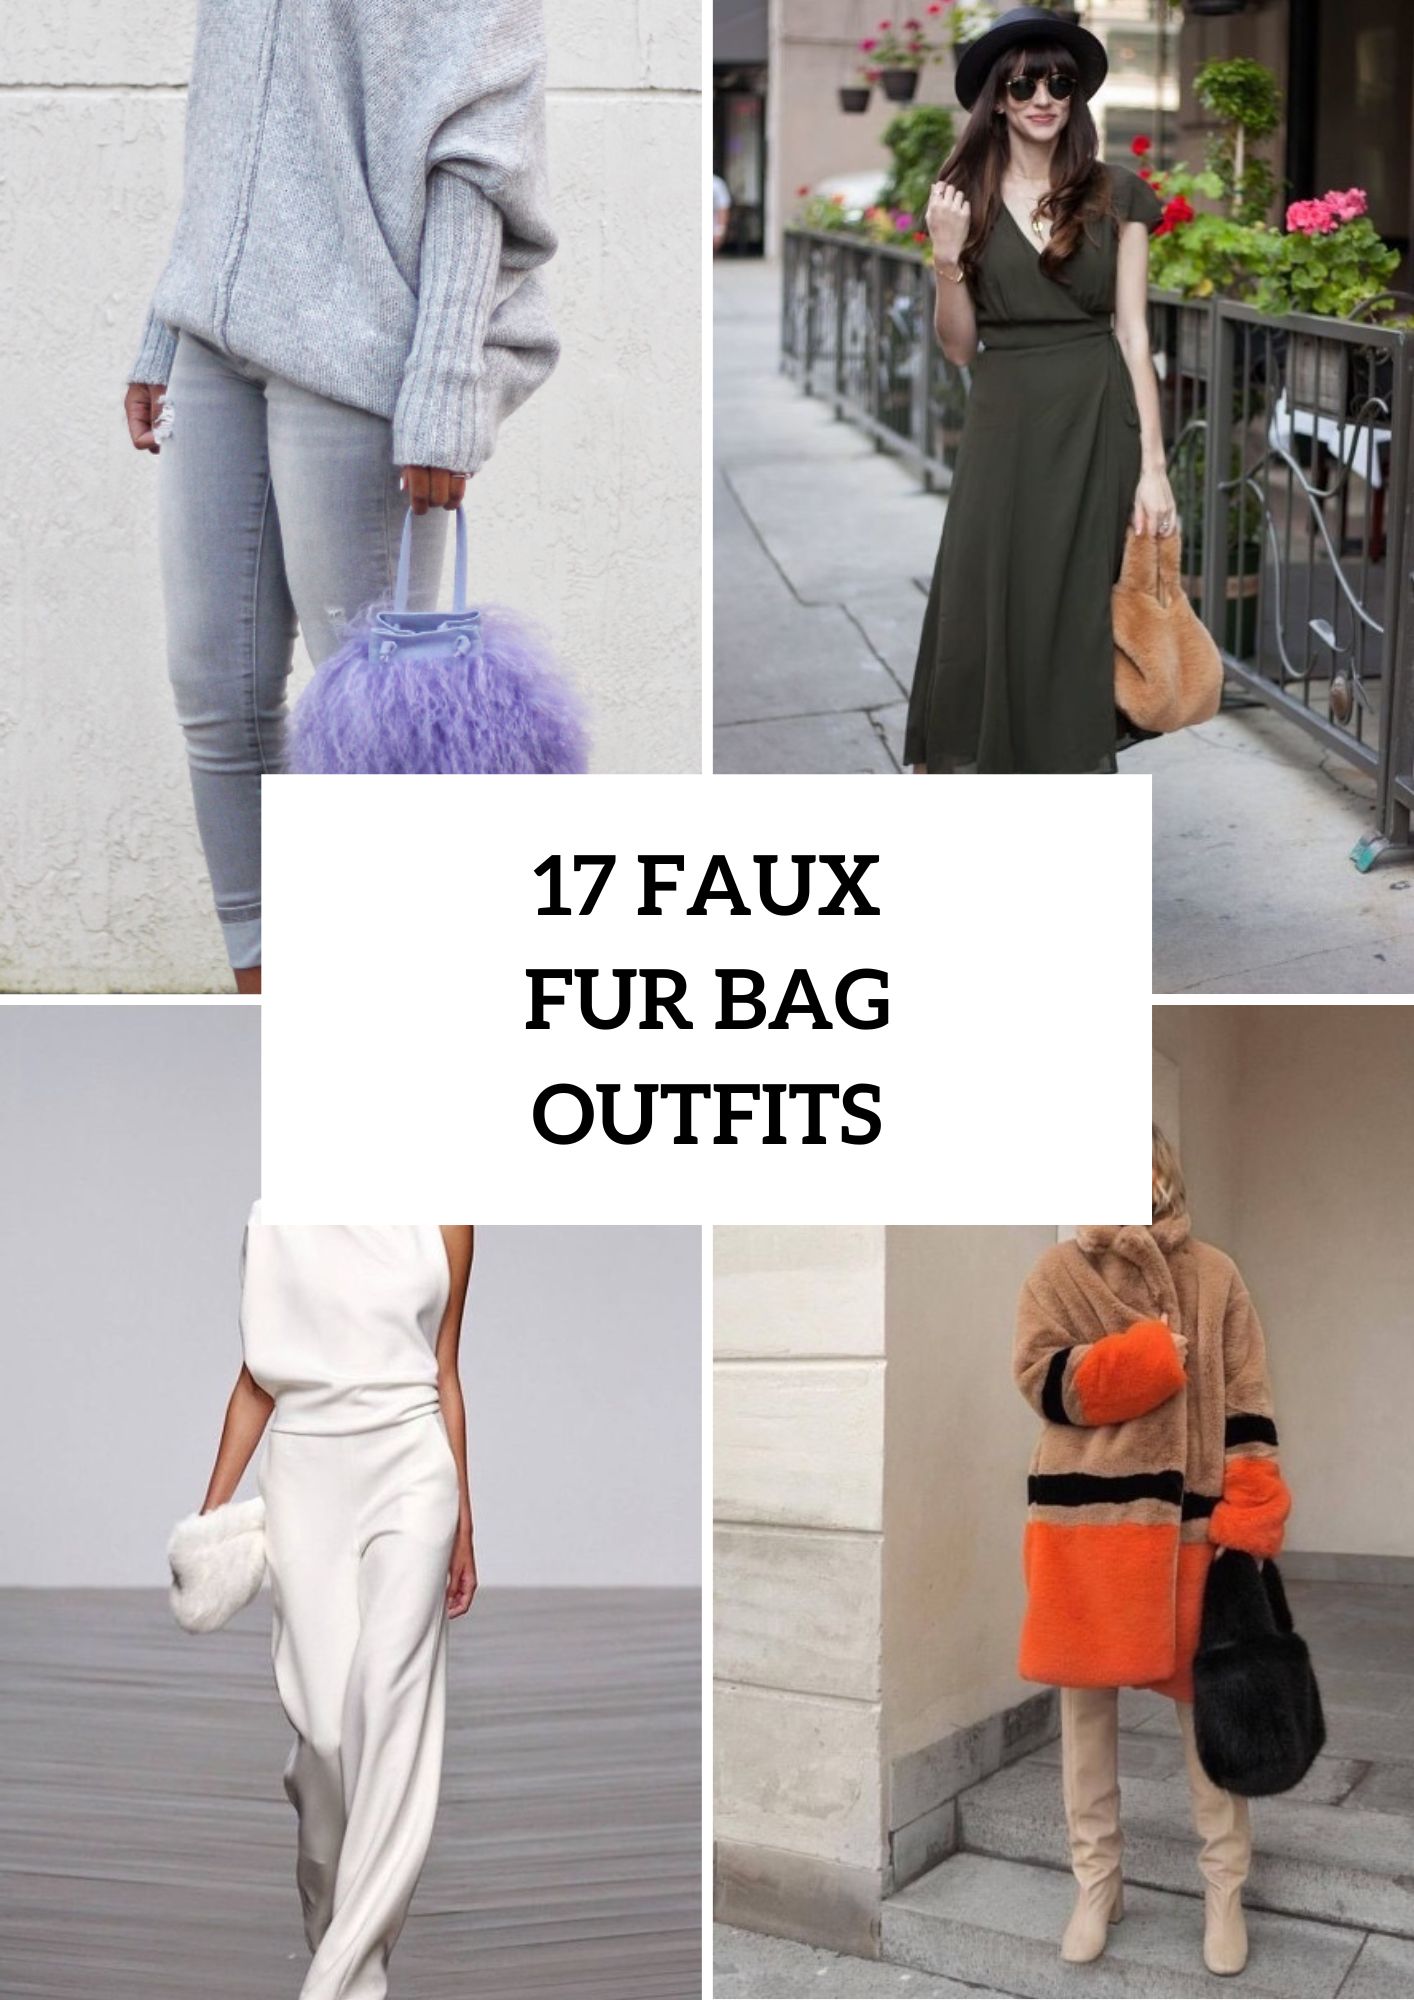 Amazing Looks With Faux Fur Bags